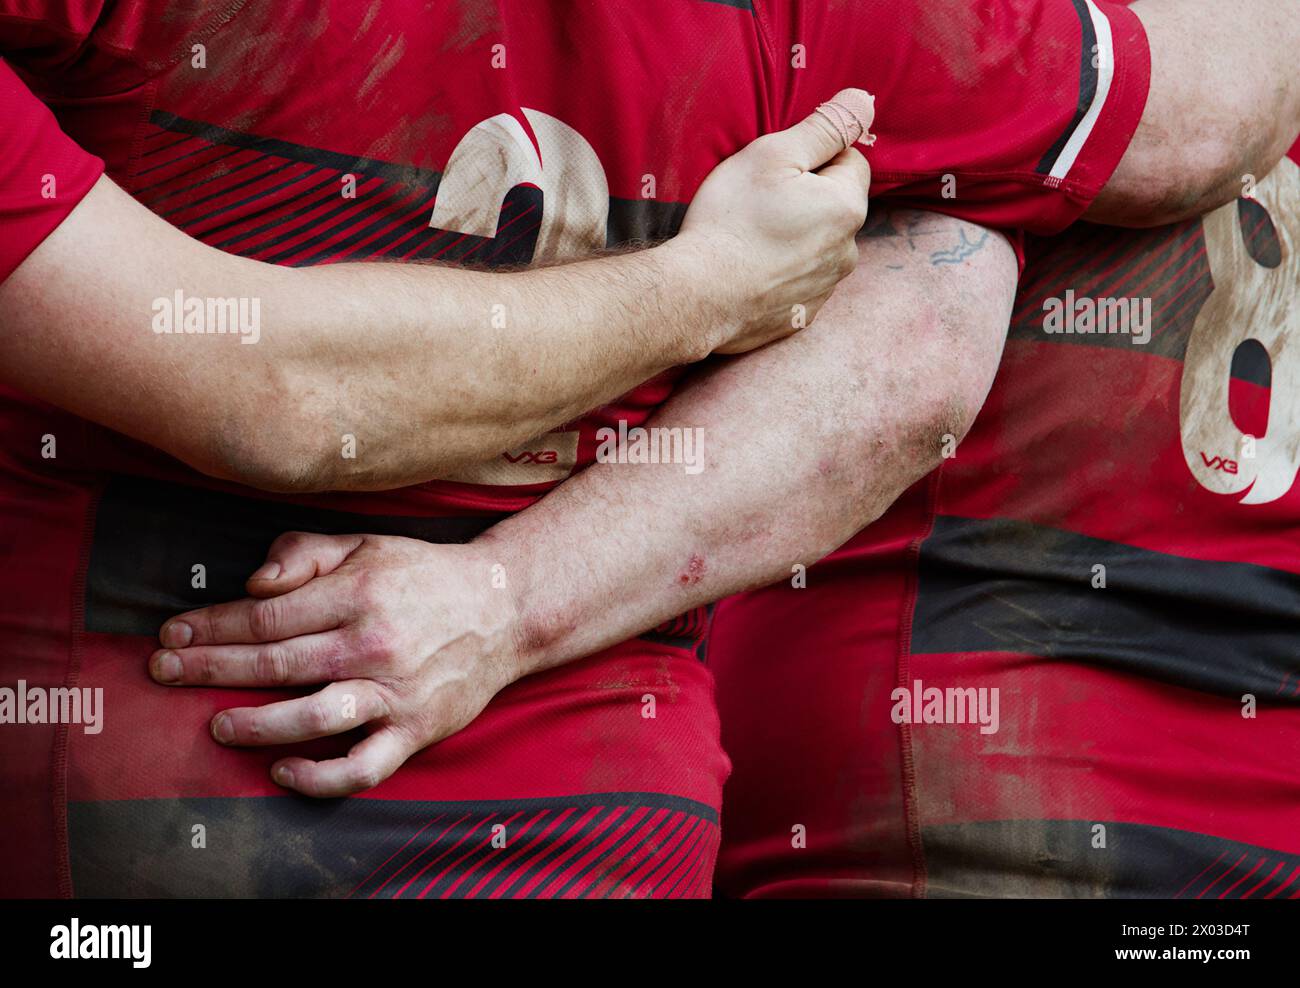 Close Up Of The Back Of Dirty Muddy Rugby Union Players With Arms Around Each Other Showing Togetherness, Camaraderie, Shoulder To Shoulder, Companion Stock Photo